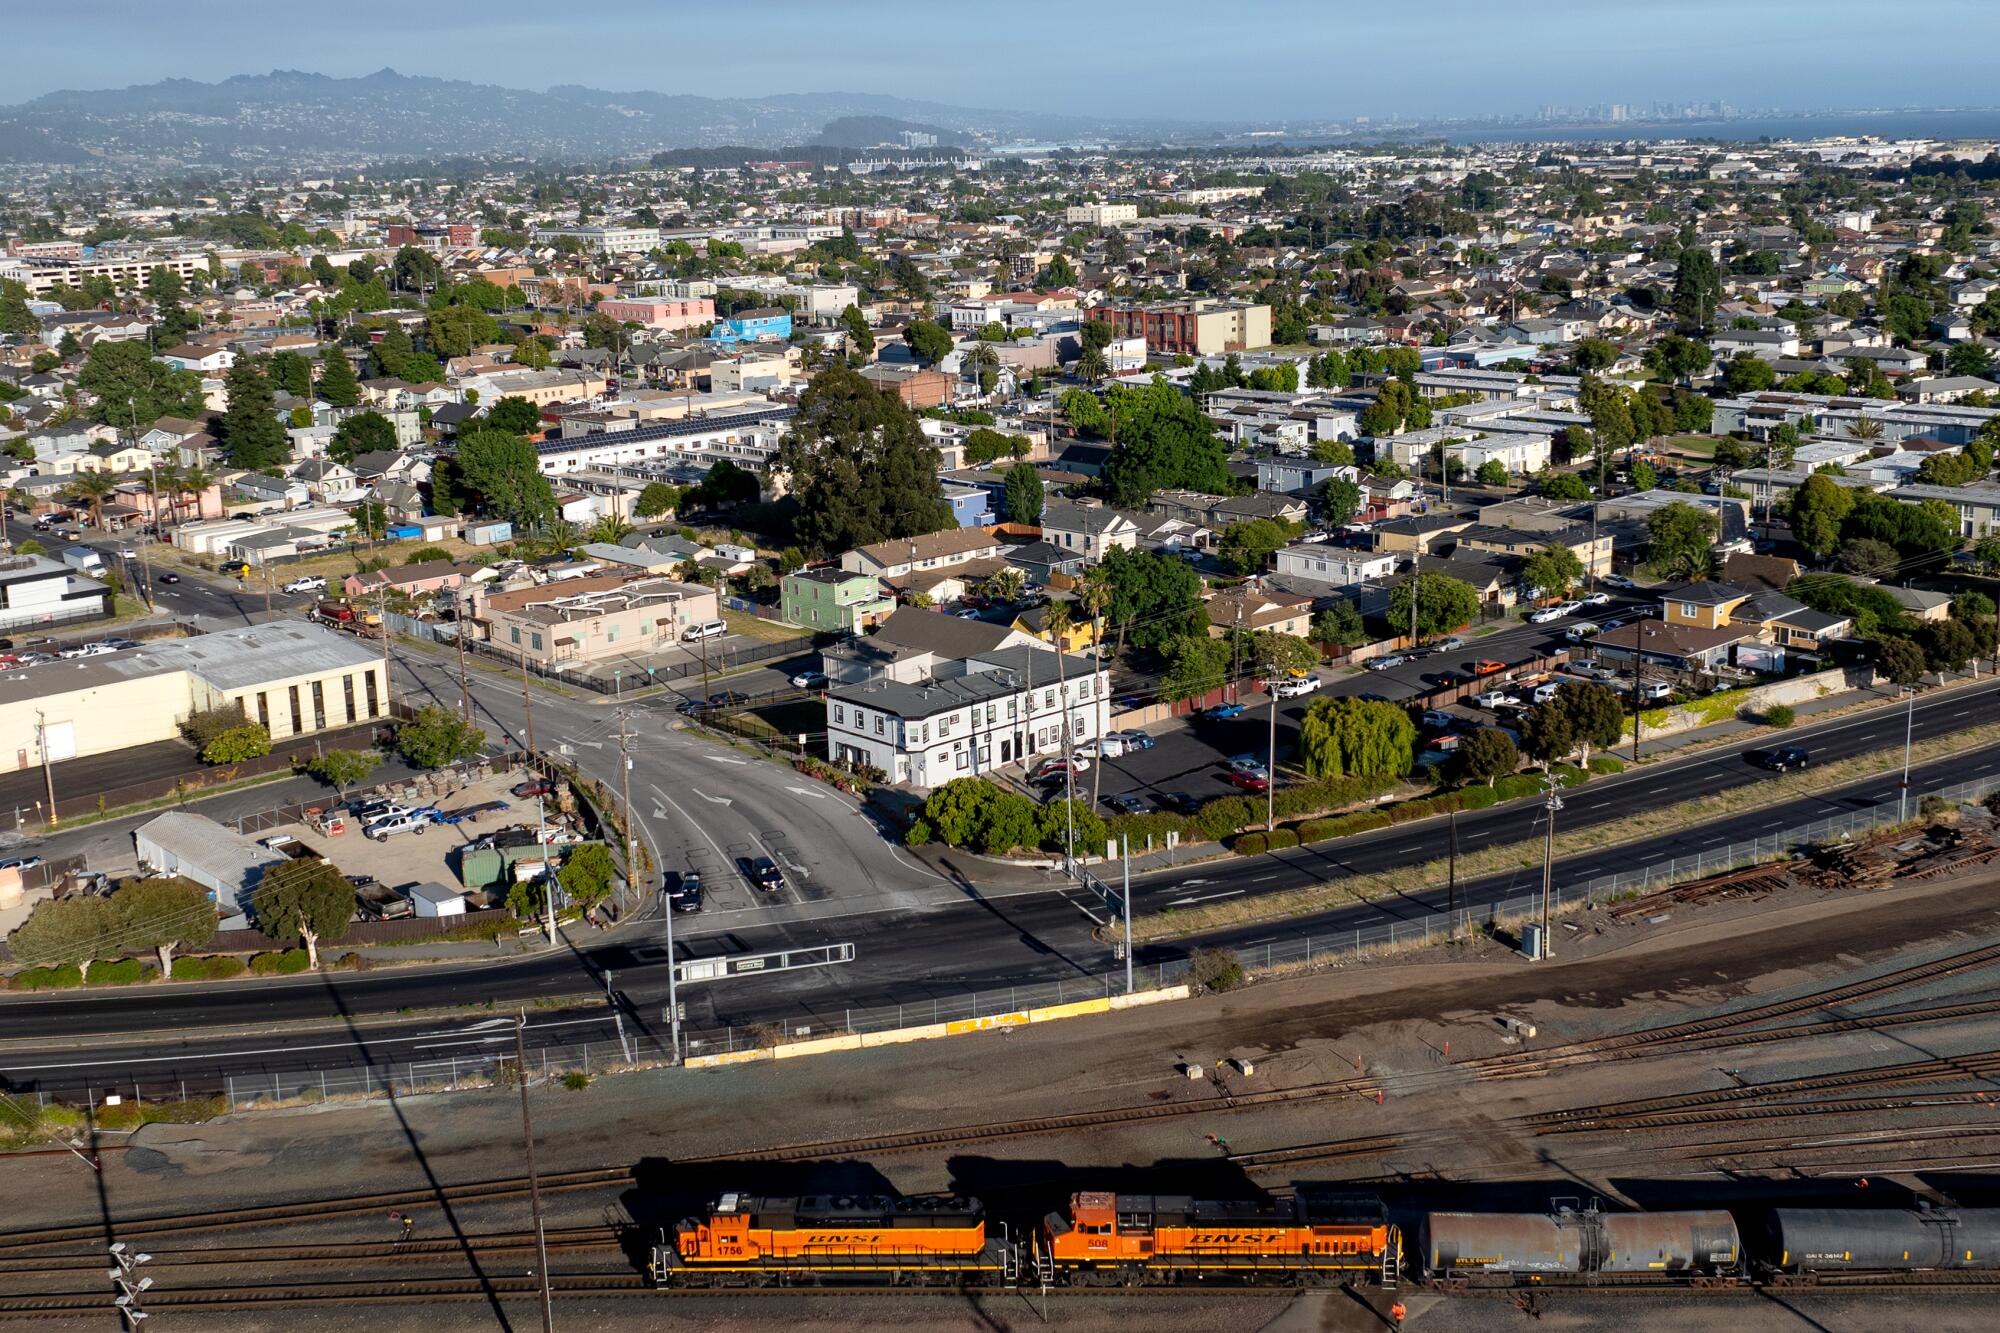 An aerial view of a city with a train in the foreground.   